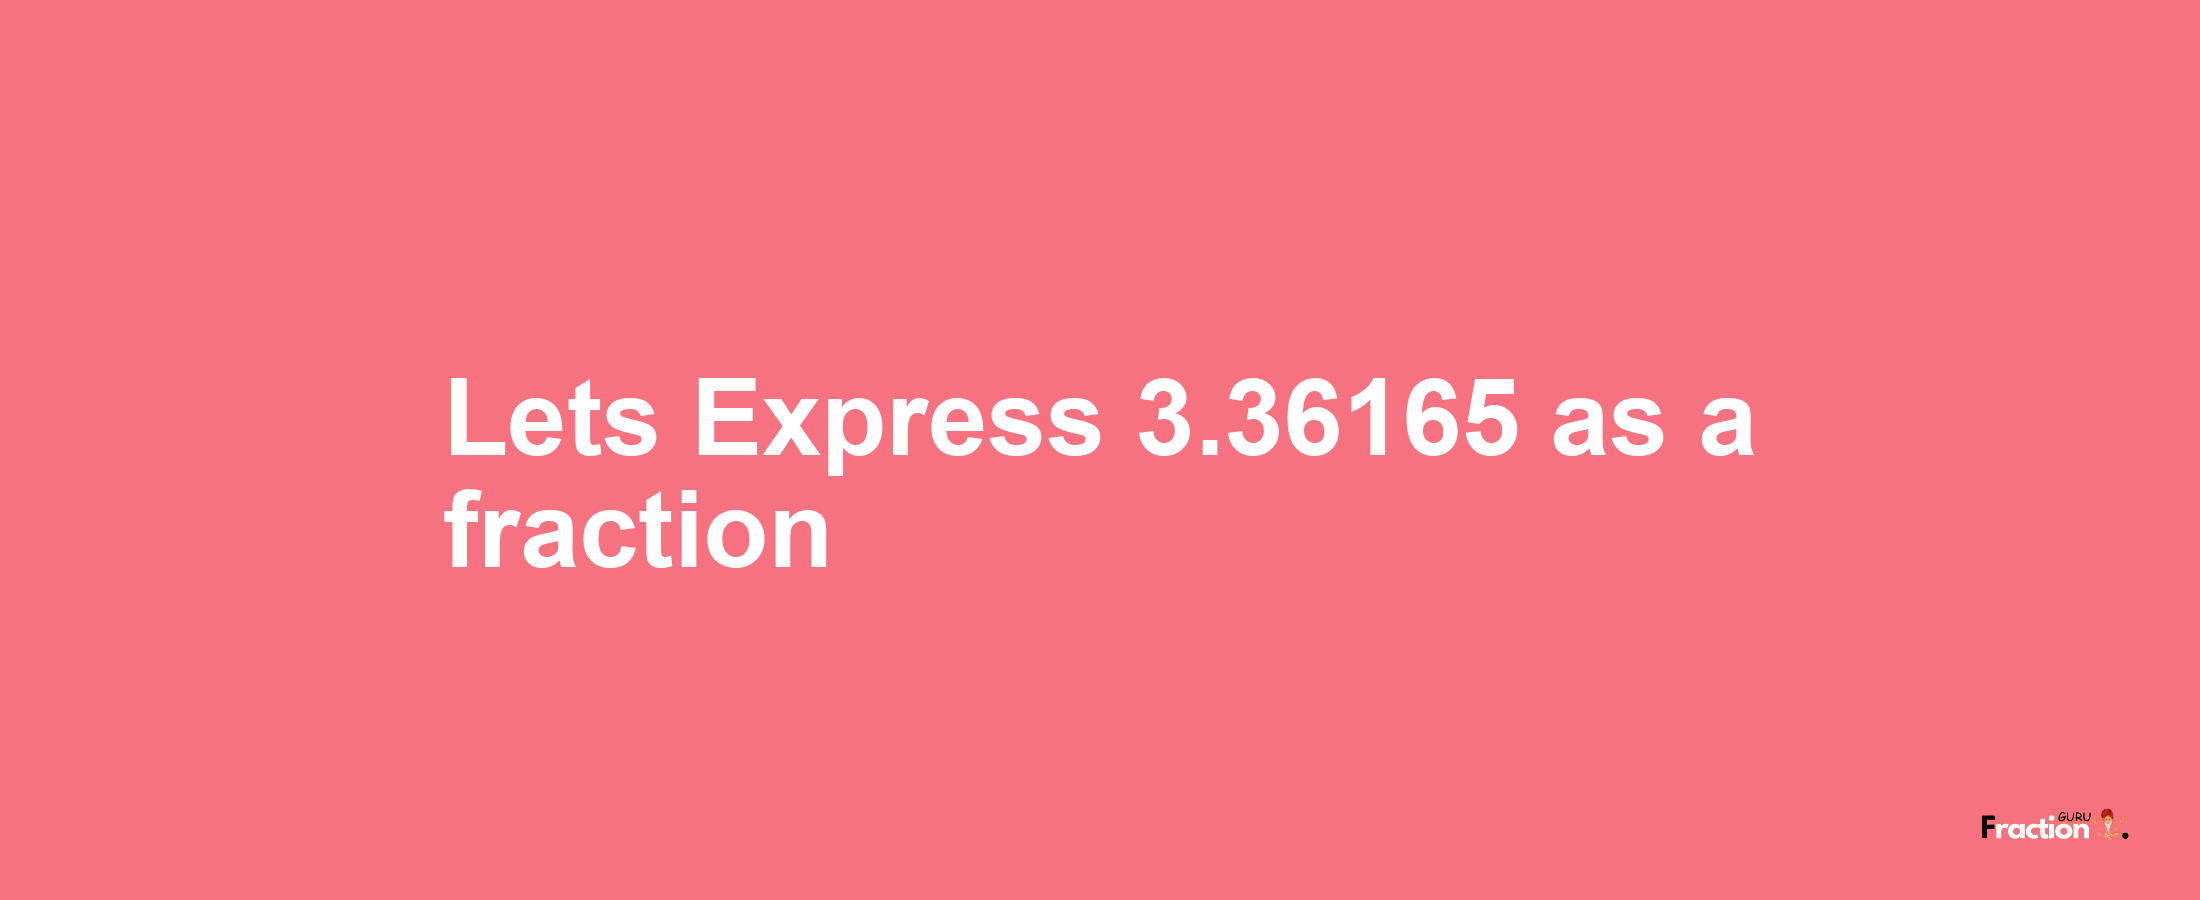 Lets Express 3.36165 as afraction